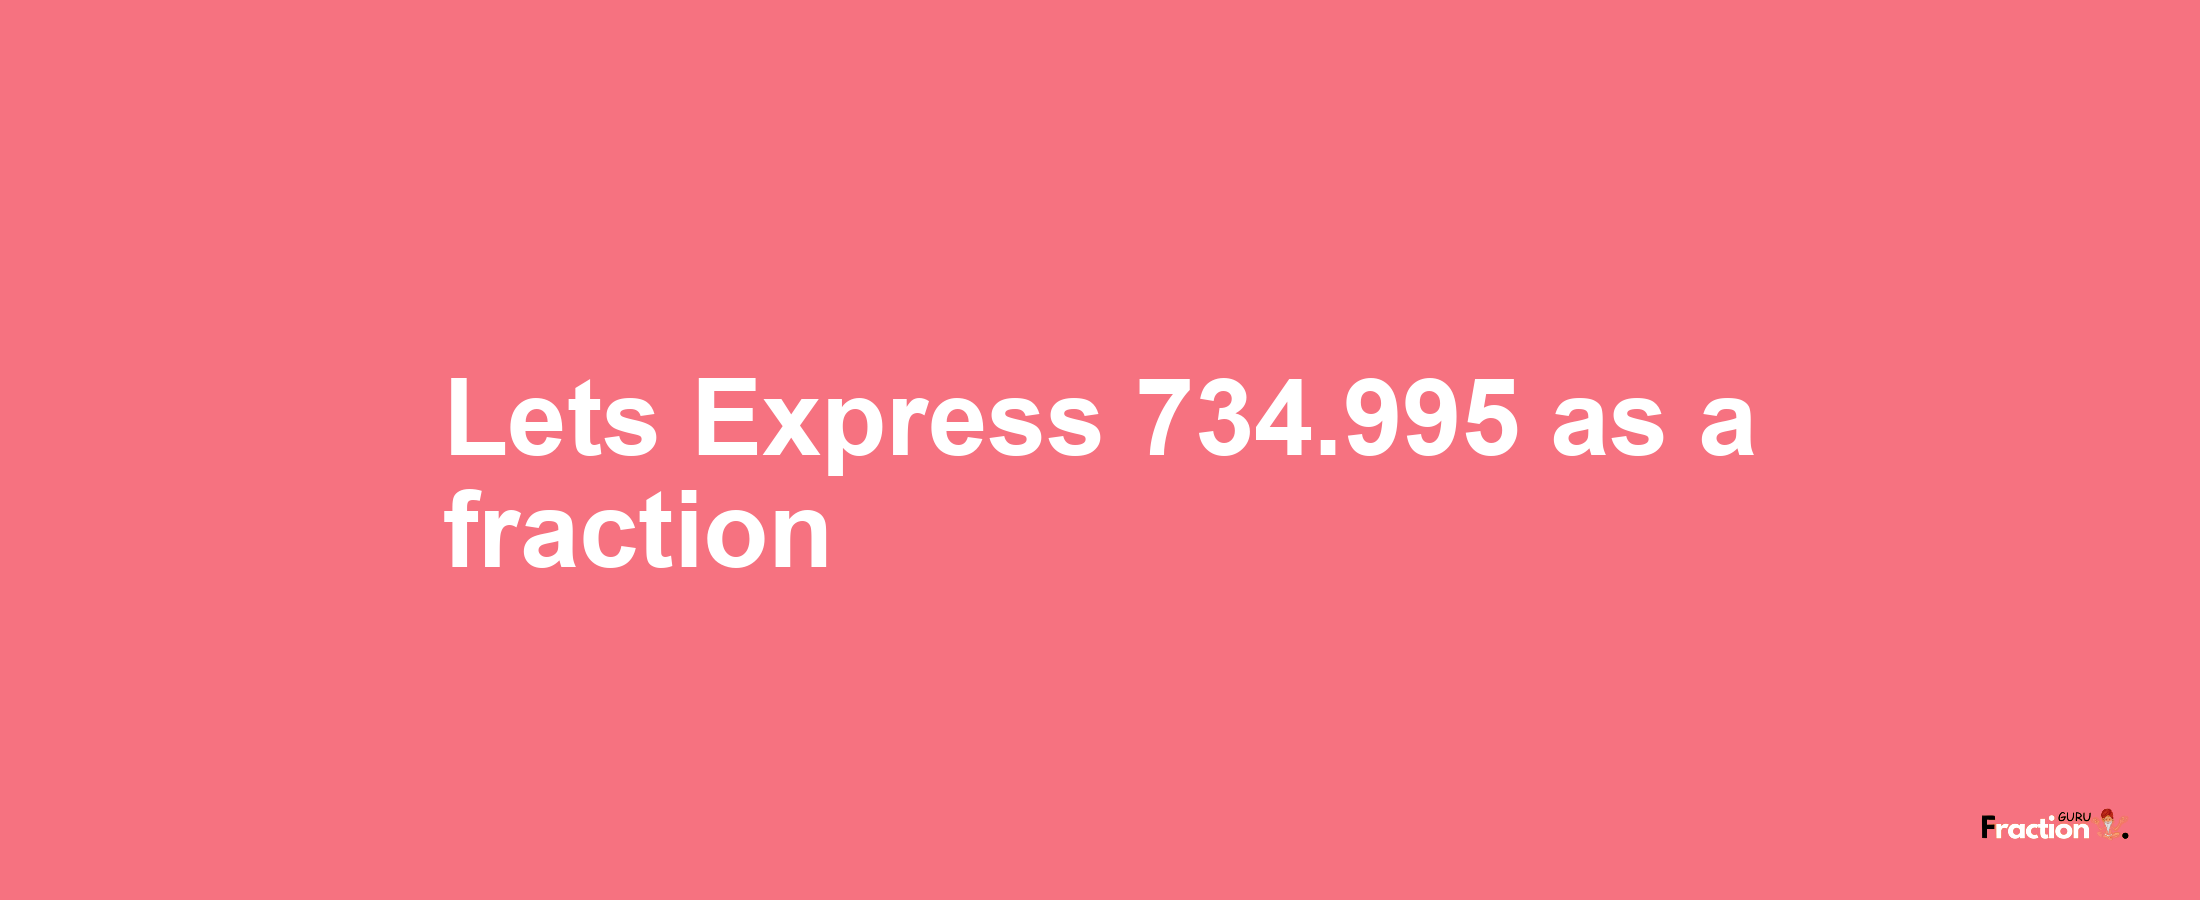 Lets Express 734.995 as afraction